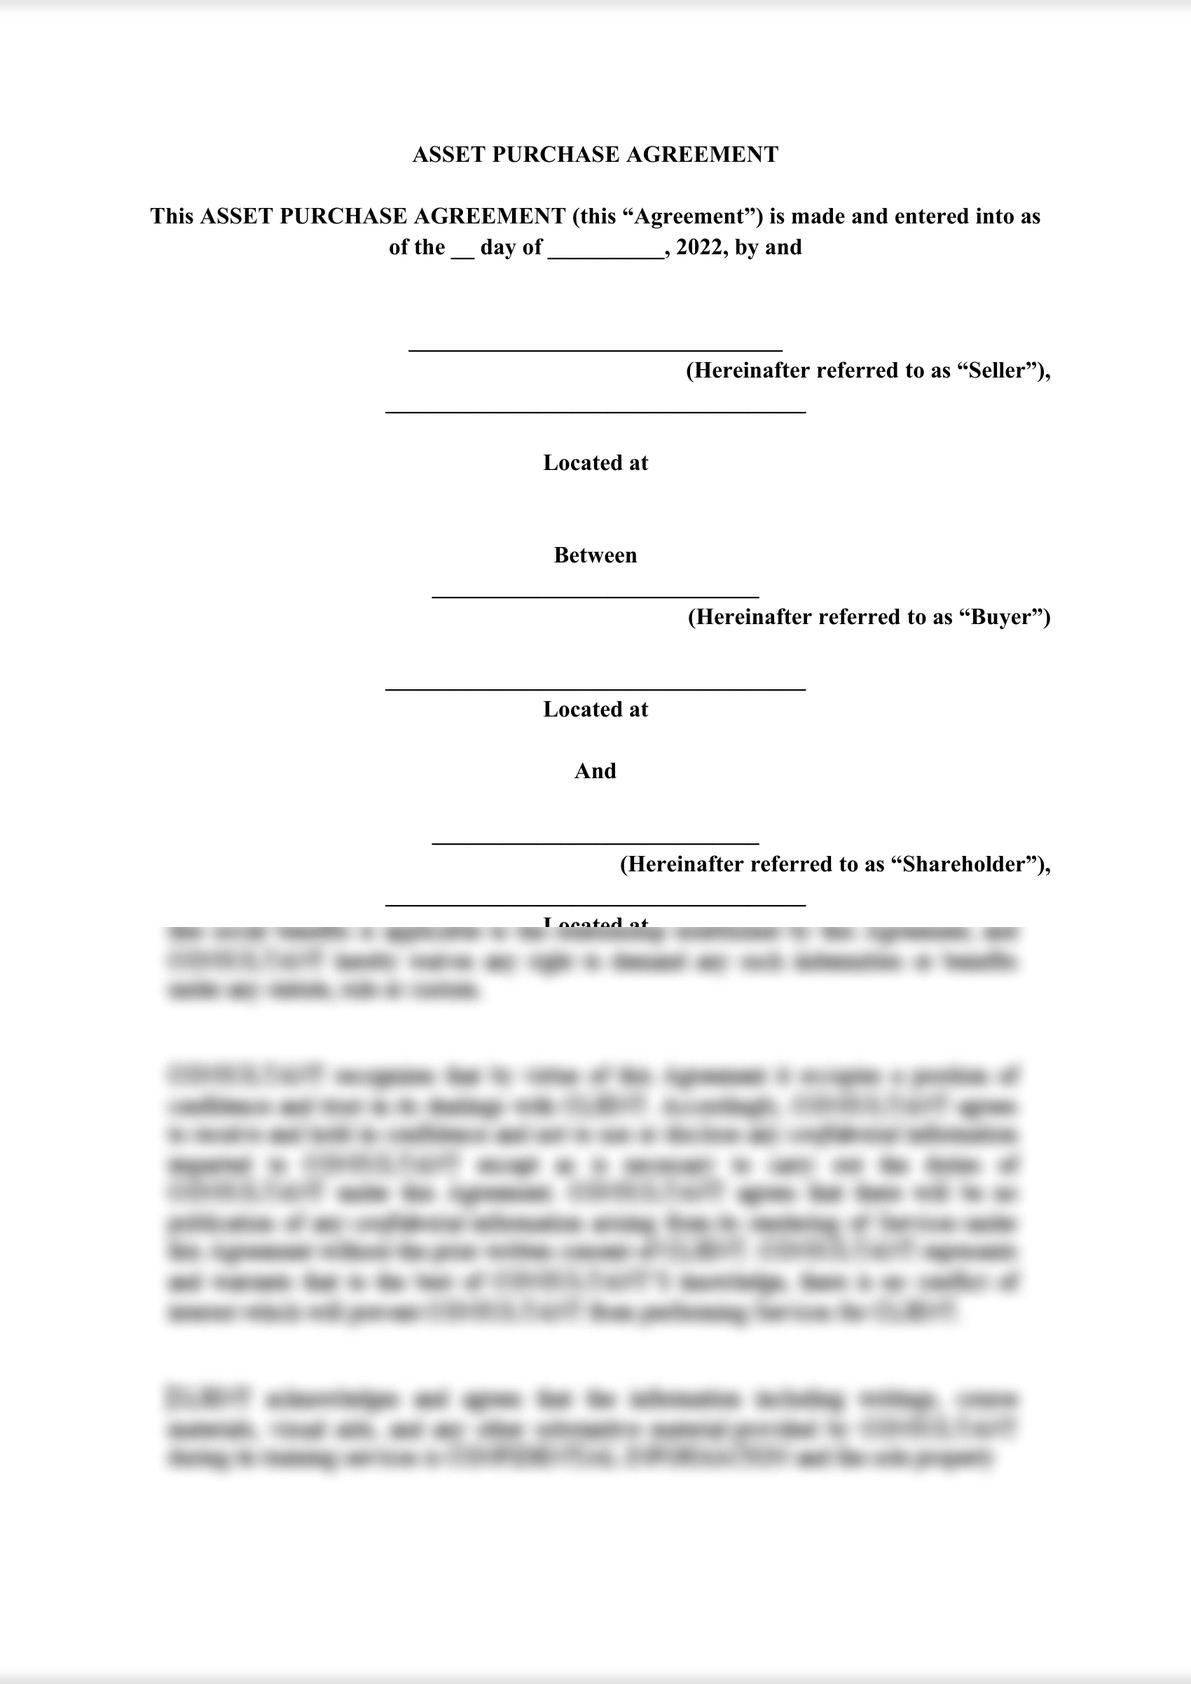 ASSET PURCHASE AGREEMENT-1